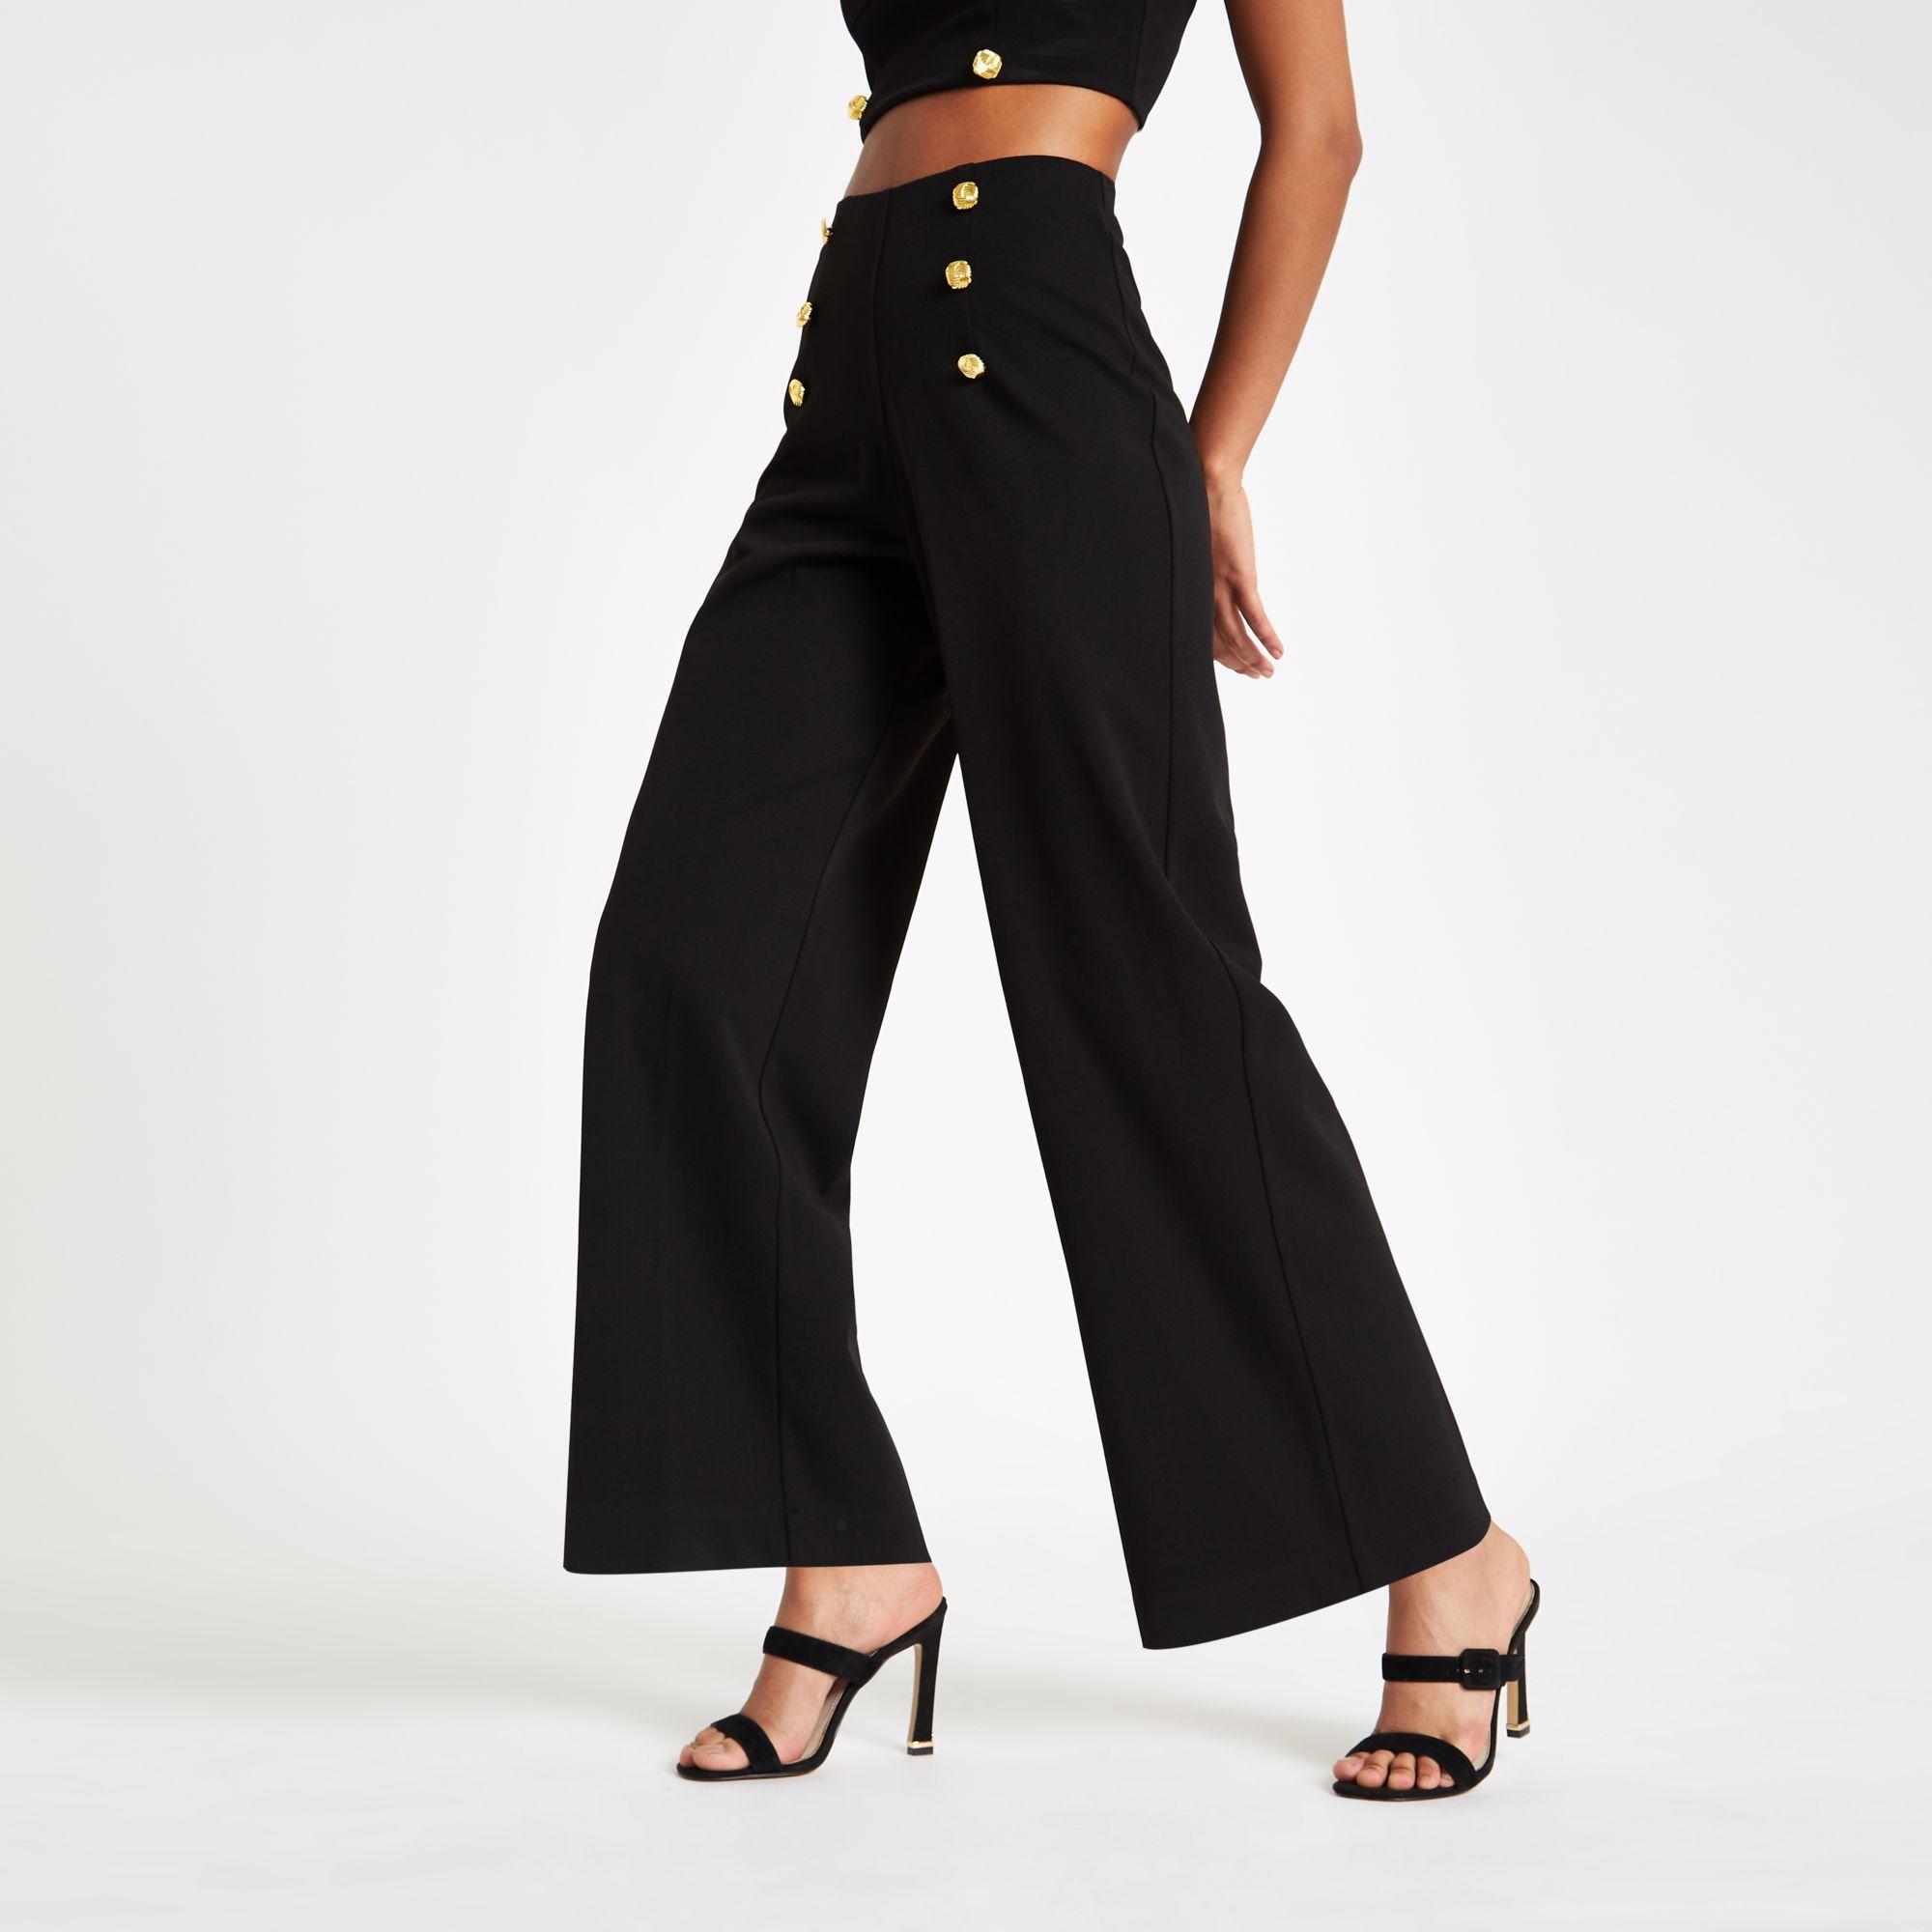 River Island Gold Tone Button Wide Leg Trousers in Black | Lyst UK